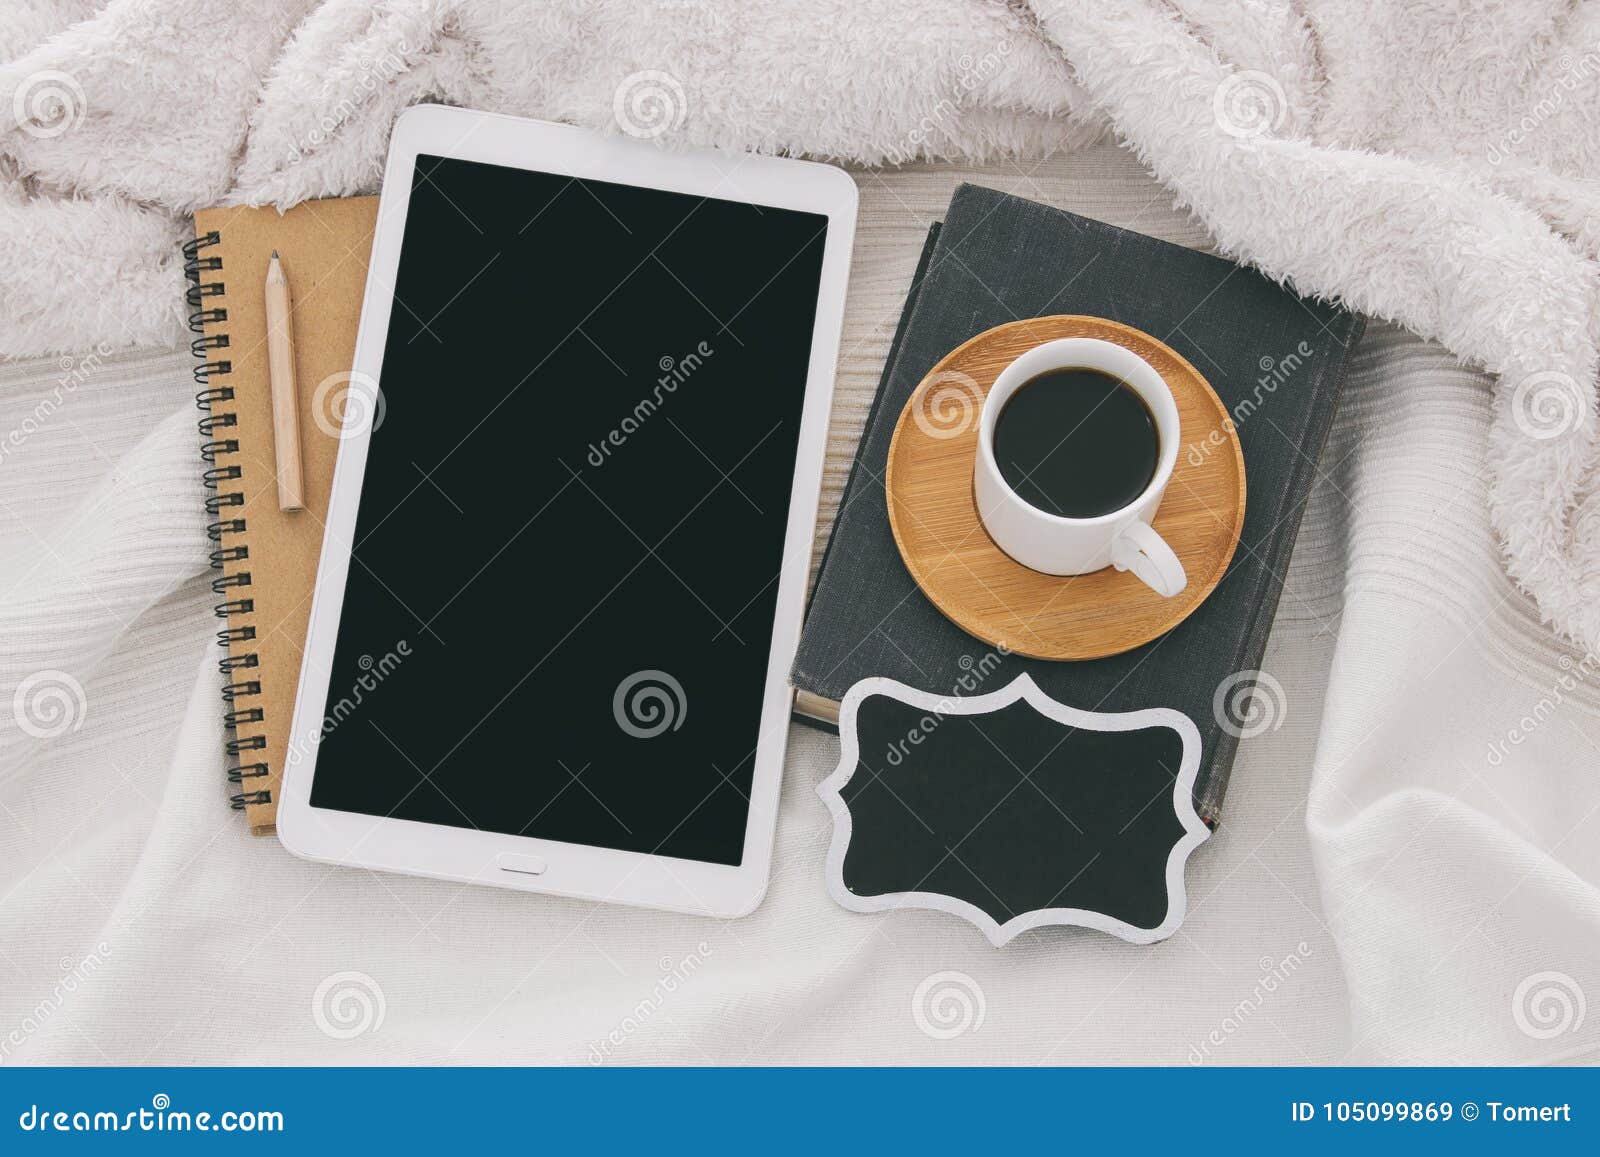 cup of coffee on the old book and tablet device with empty black screen over cozy and white blanket. top view.